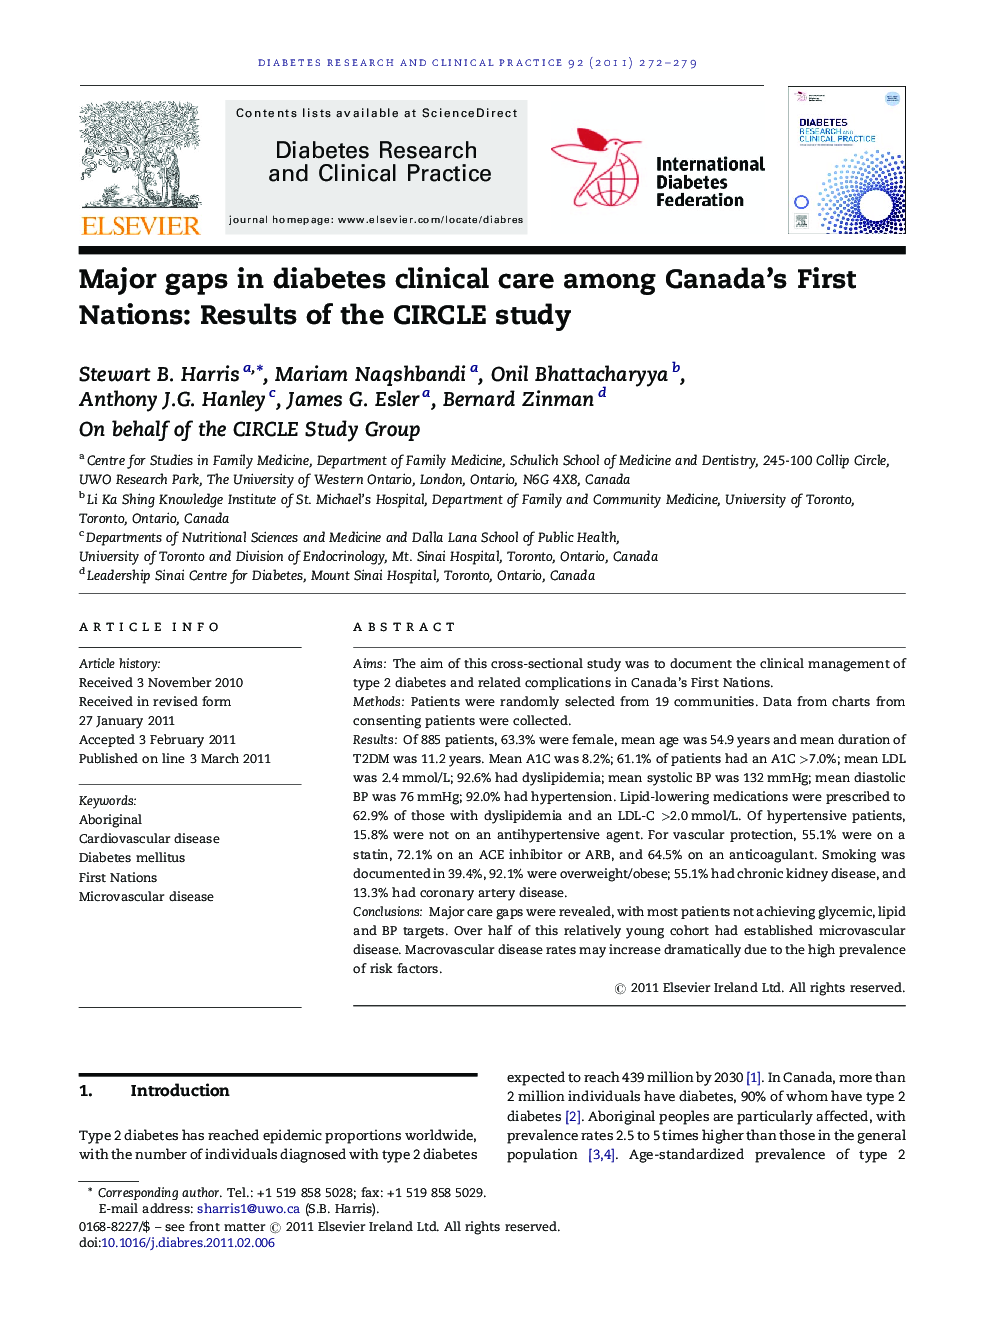 Major gaps in diabetes clinical care among Canada's First Nations: Results of the CIRCLE study